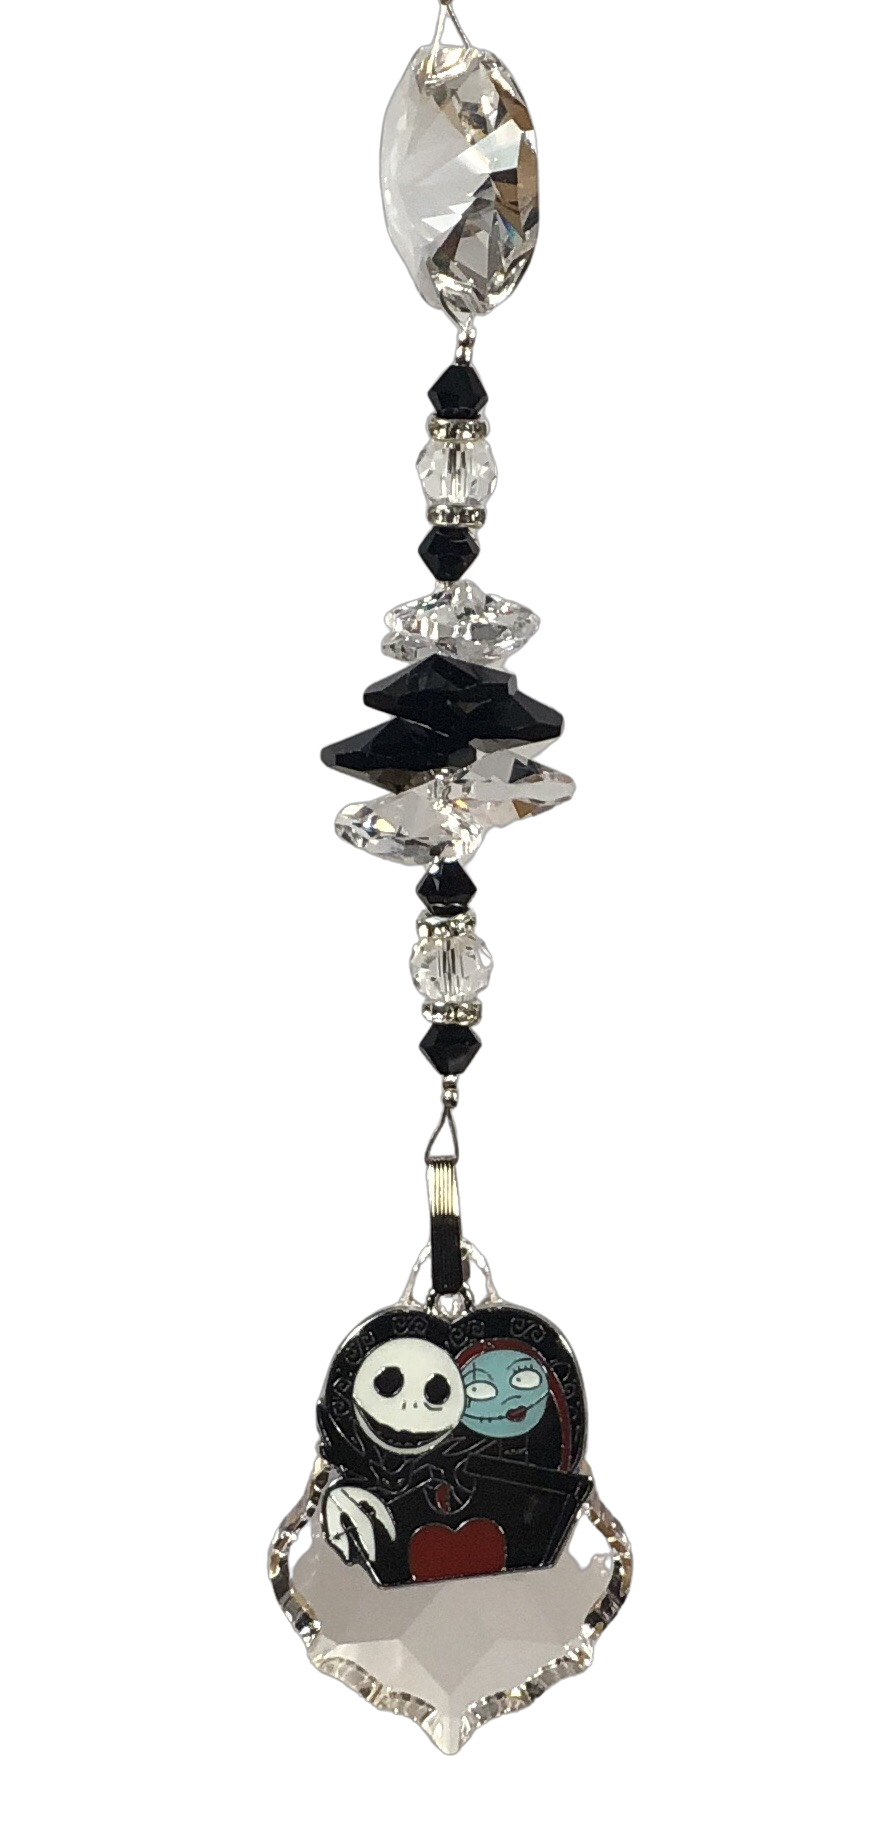 A Nightmare Before Christmas - Jack & Sally crystal suncatcher, decorated with 50mm Starburst crystal and snowflake obsidian gemstone.